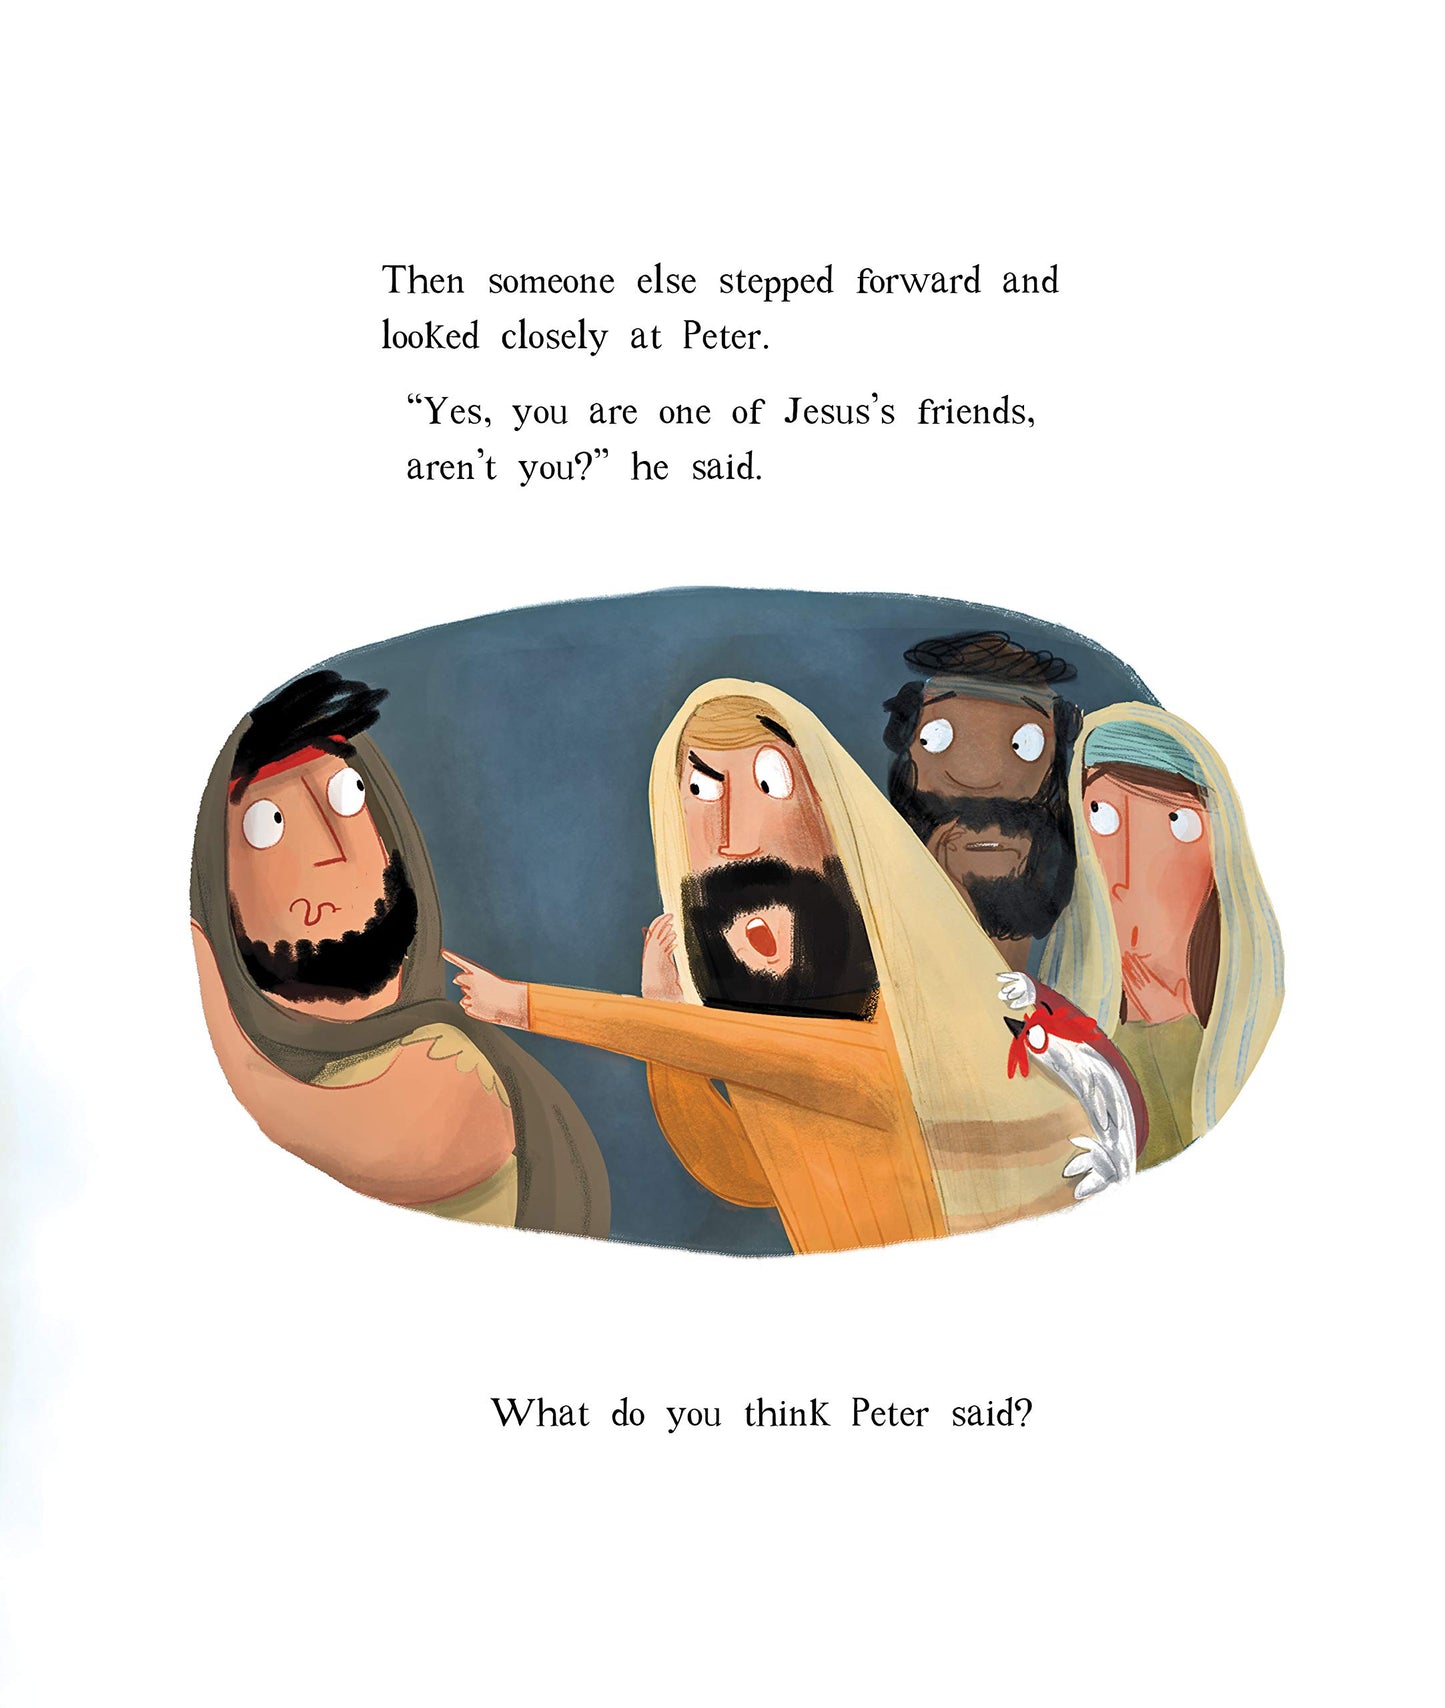 The Friend Who Forgives Storybook: A true story about how Peter failed and Jesus forgave (Illustrated Christian Bible book teaching kids ages 3 - 6 ... wonderful gift.) (Tales That Tell the Truth)